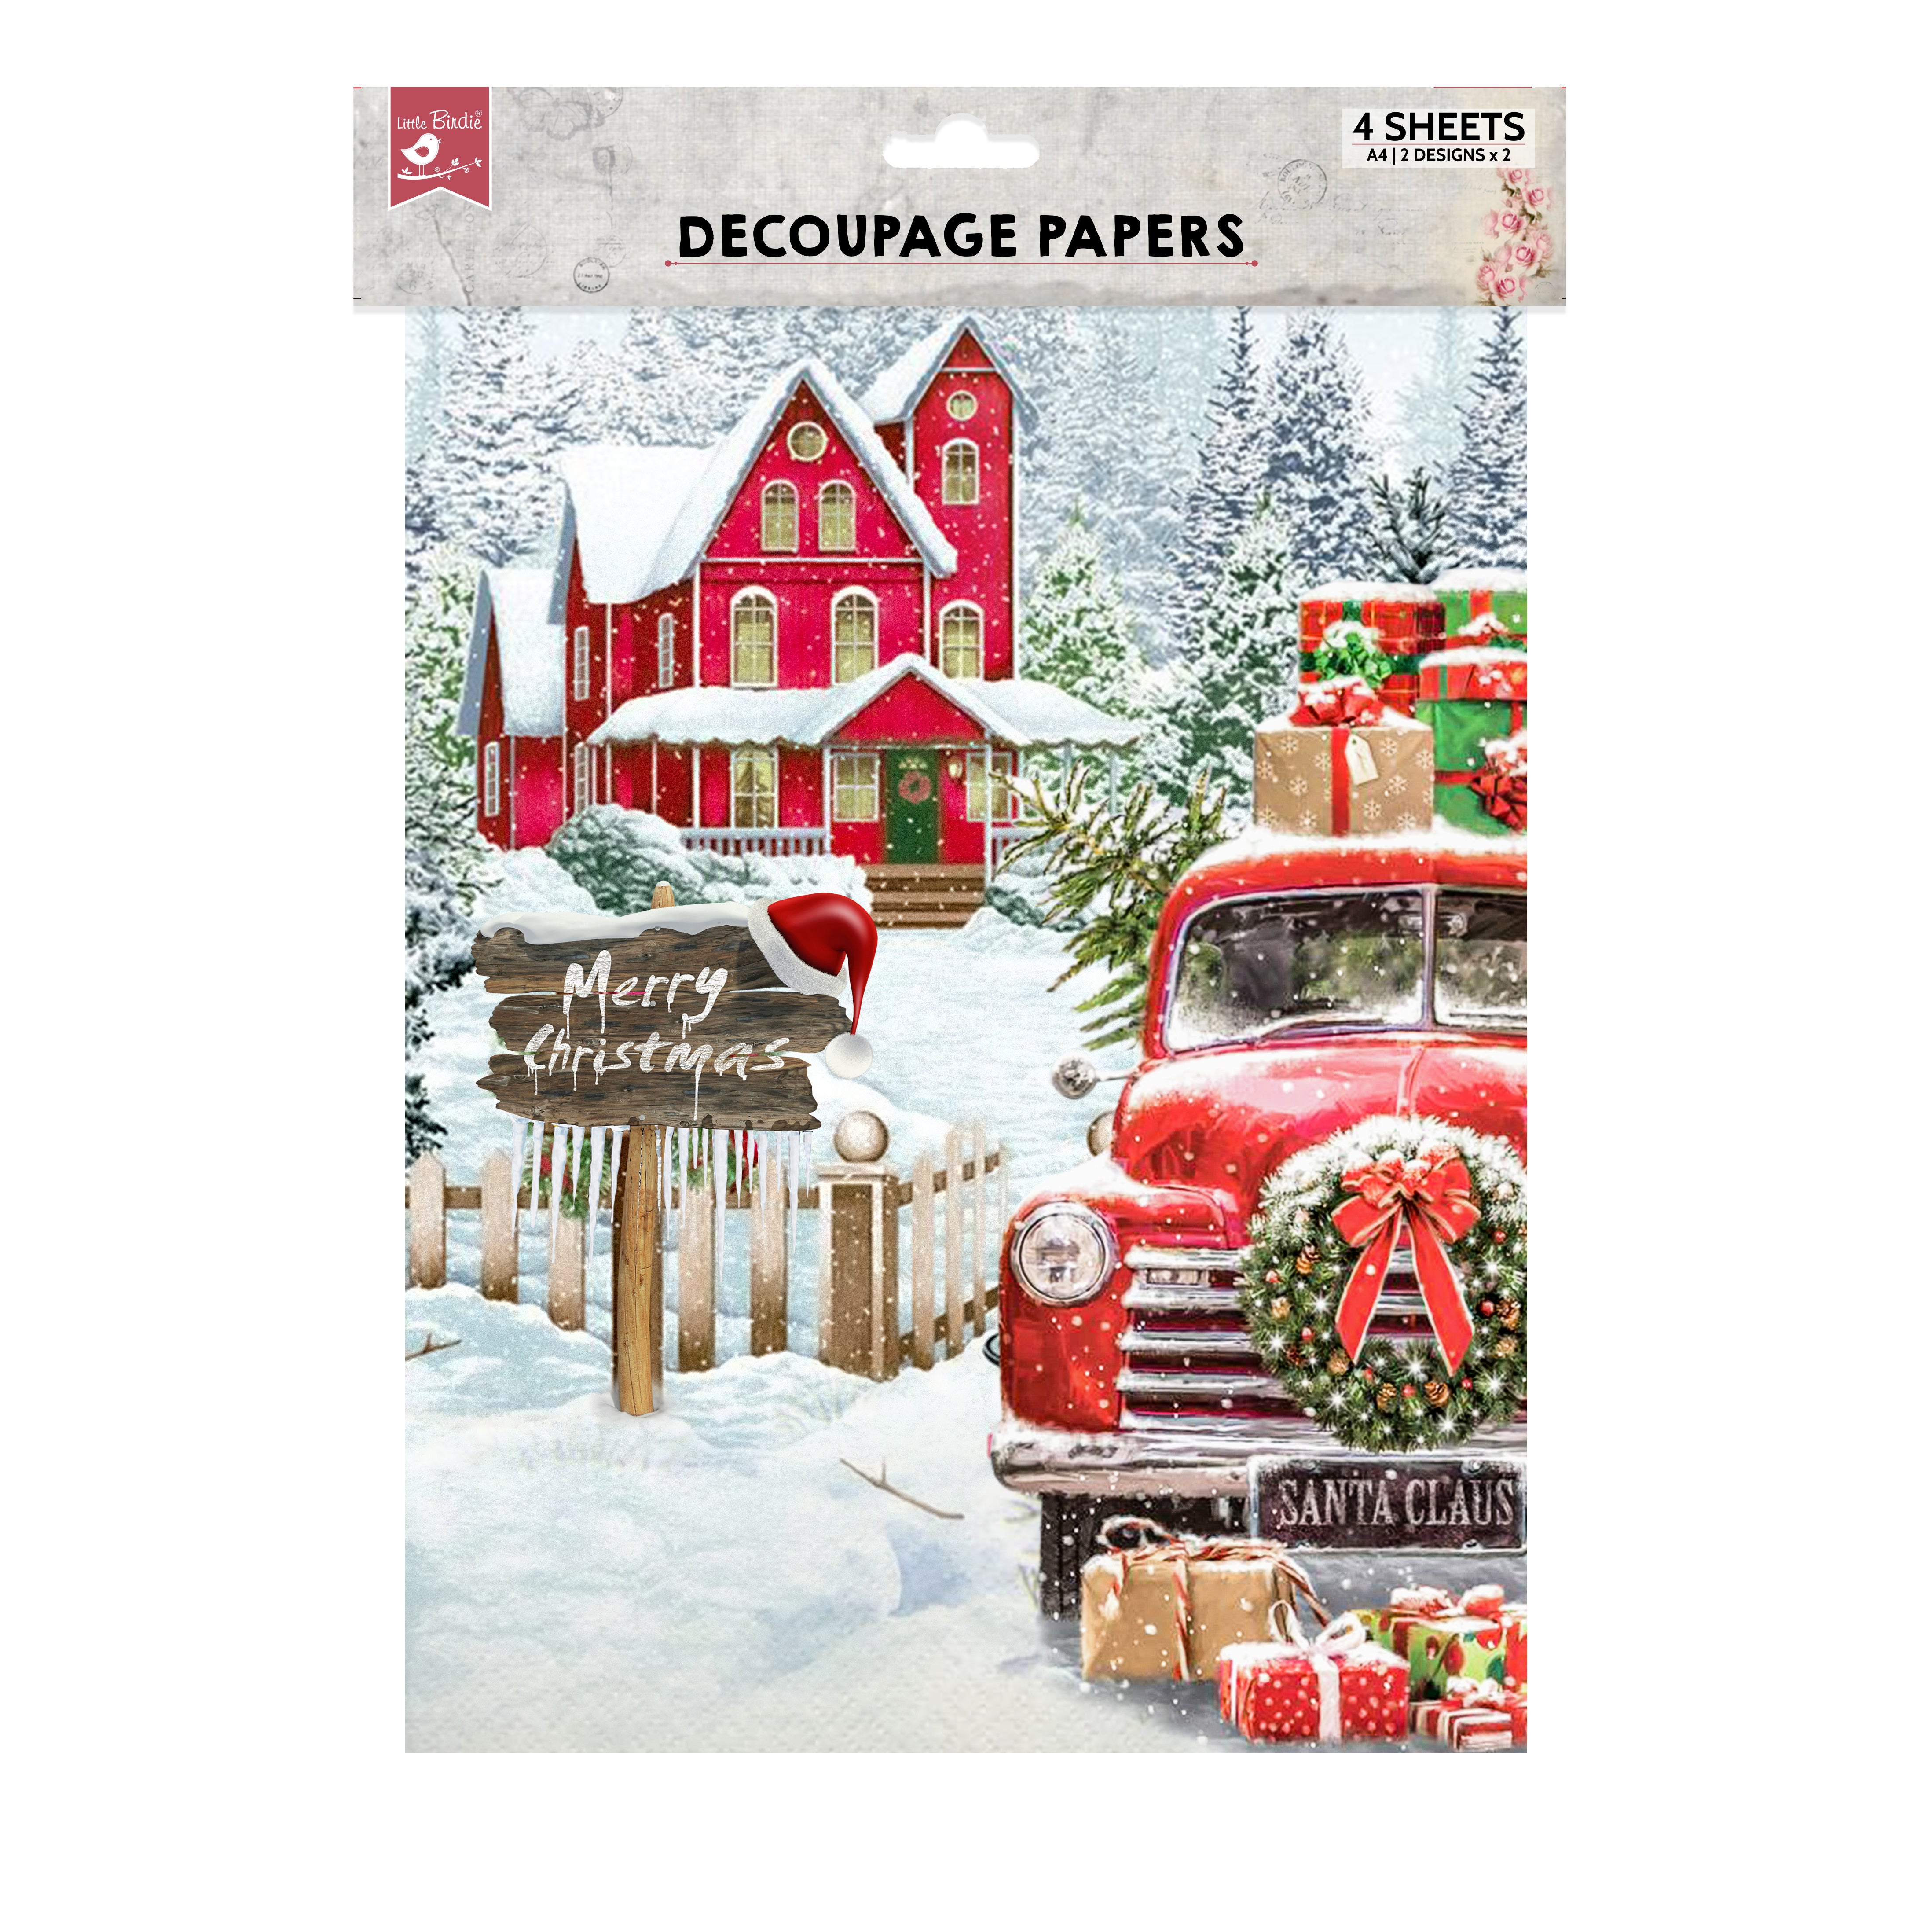 Decoupage Paper Holiday Presents A4 2 Designs 4Sheets